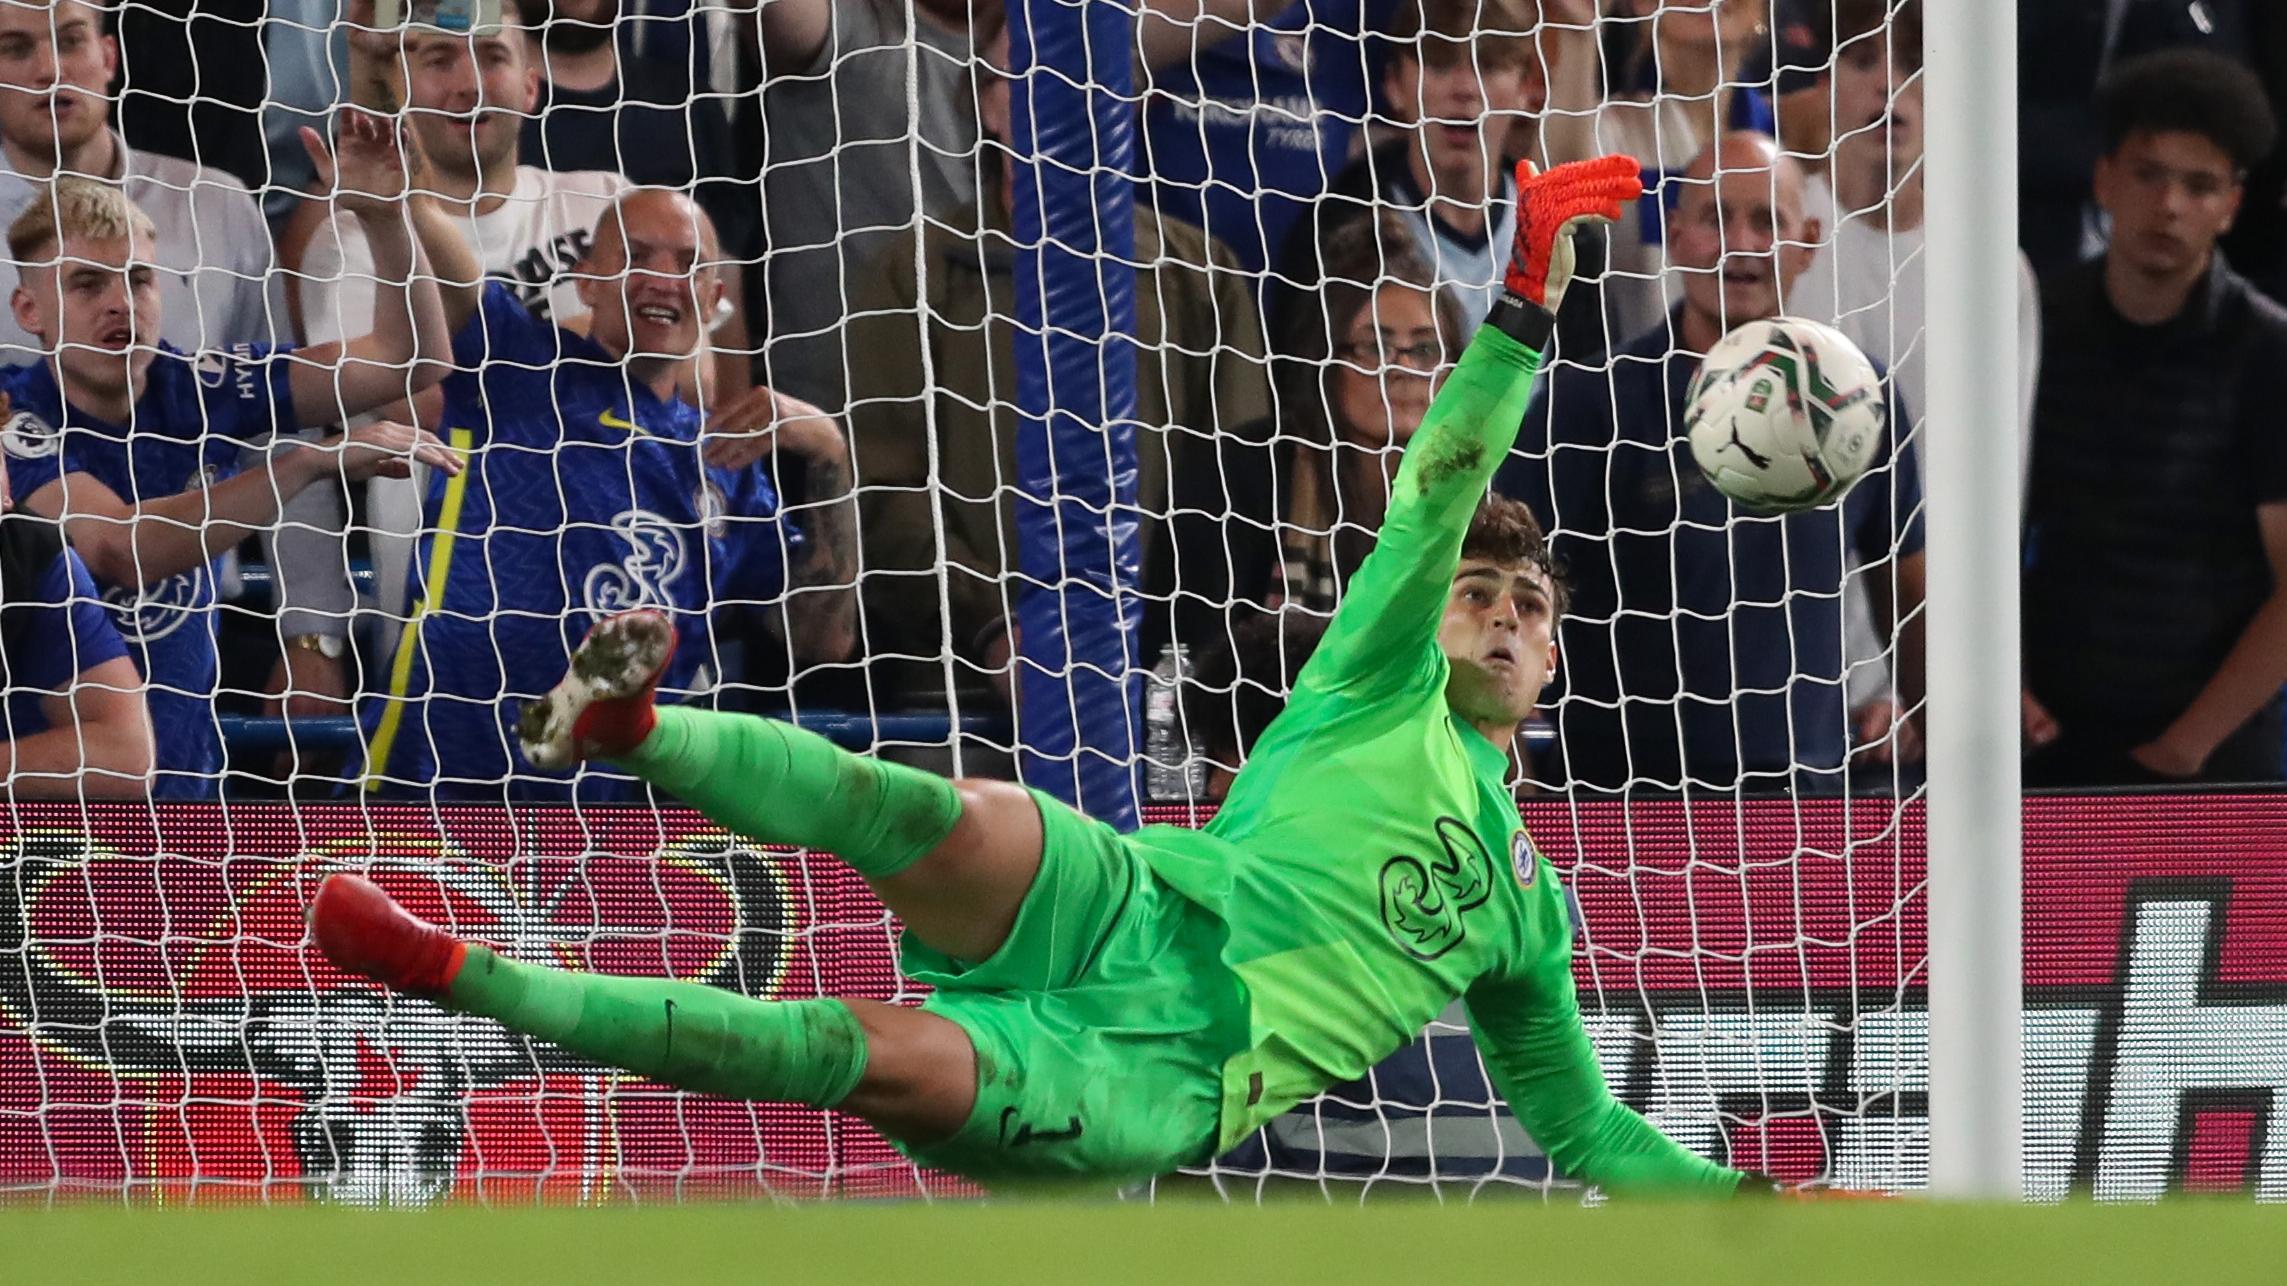 'Wow!' - Chelsea fans say the same thing after what Kepa Arrizabalaga did vs Aston Villa